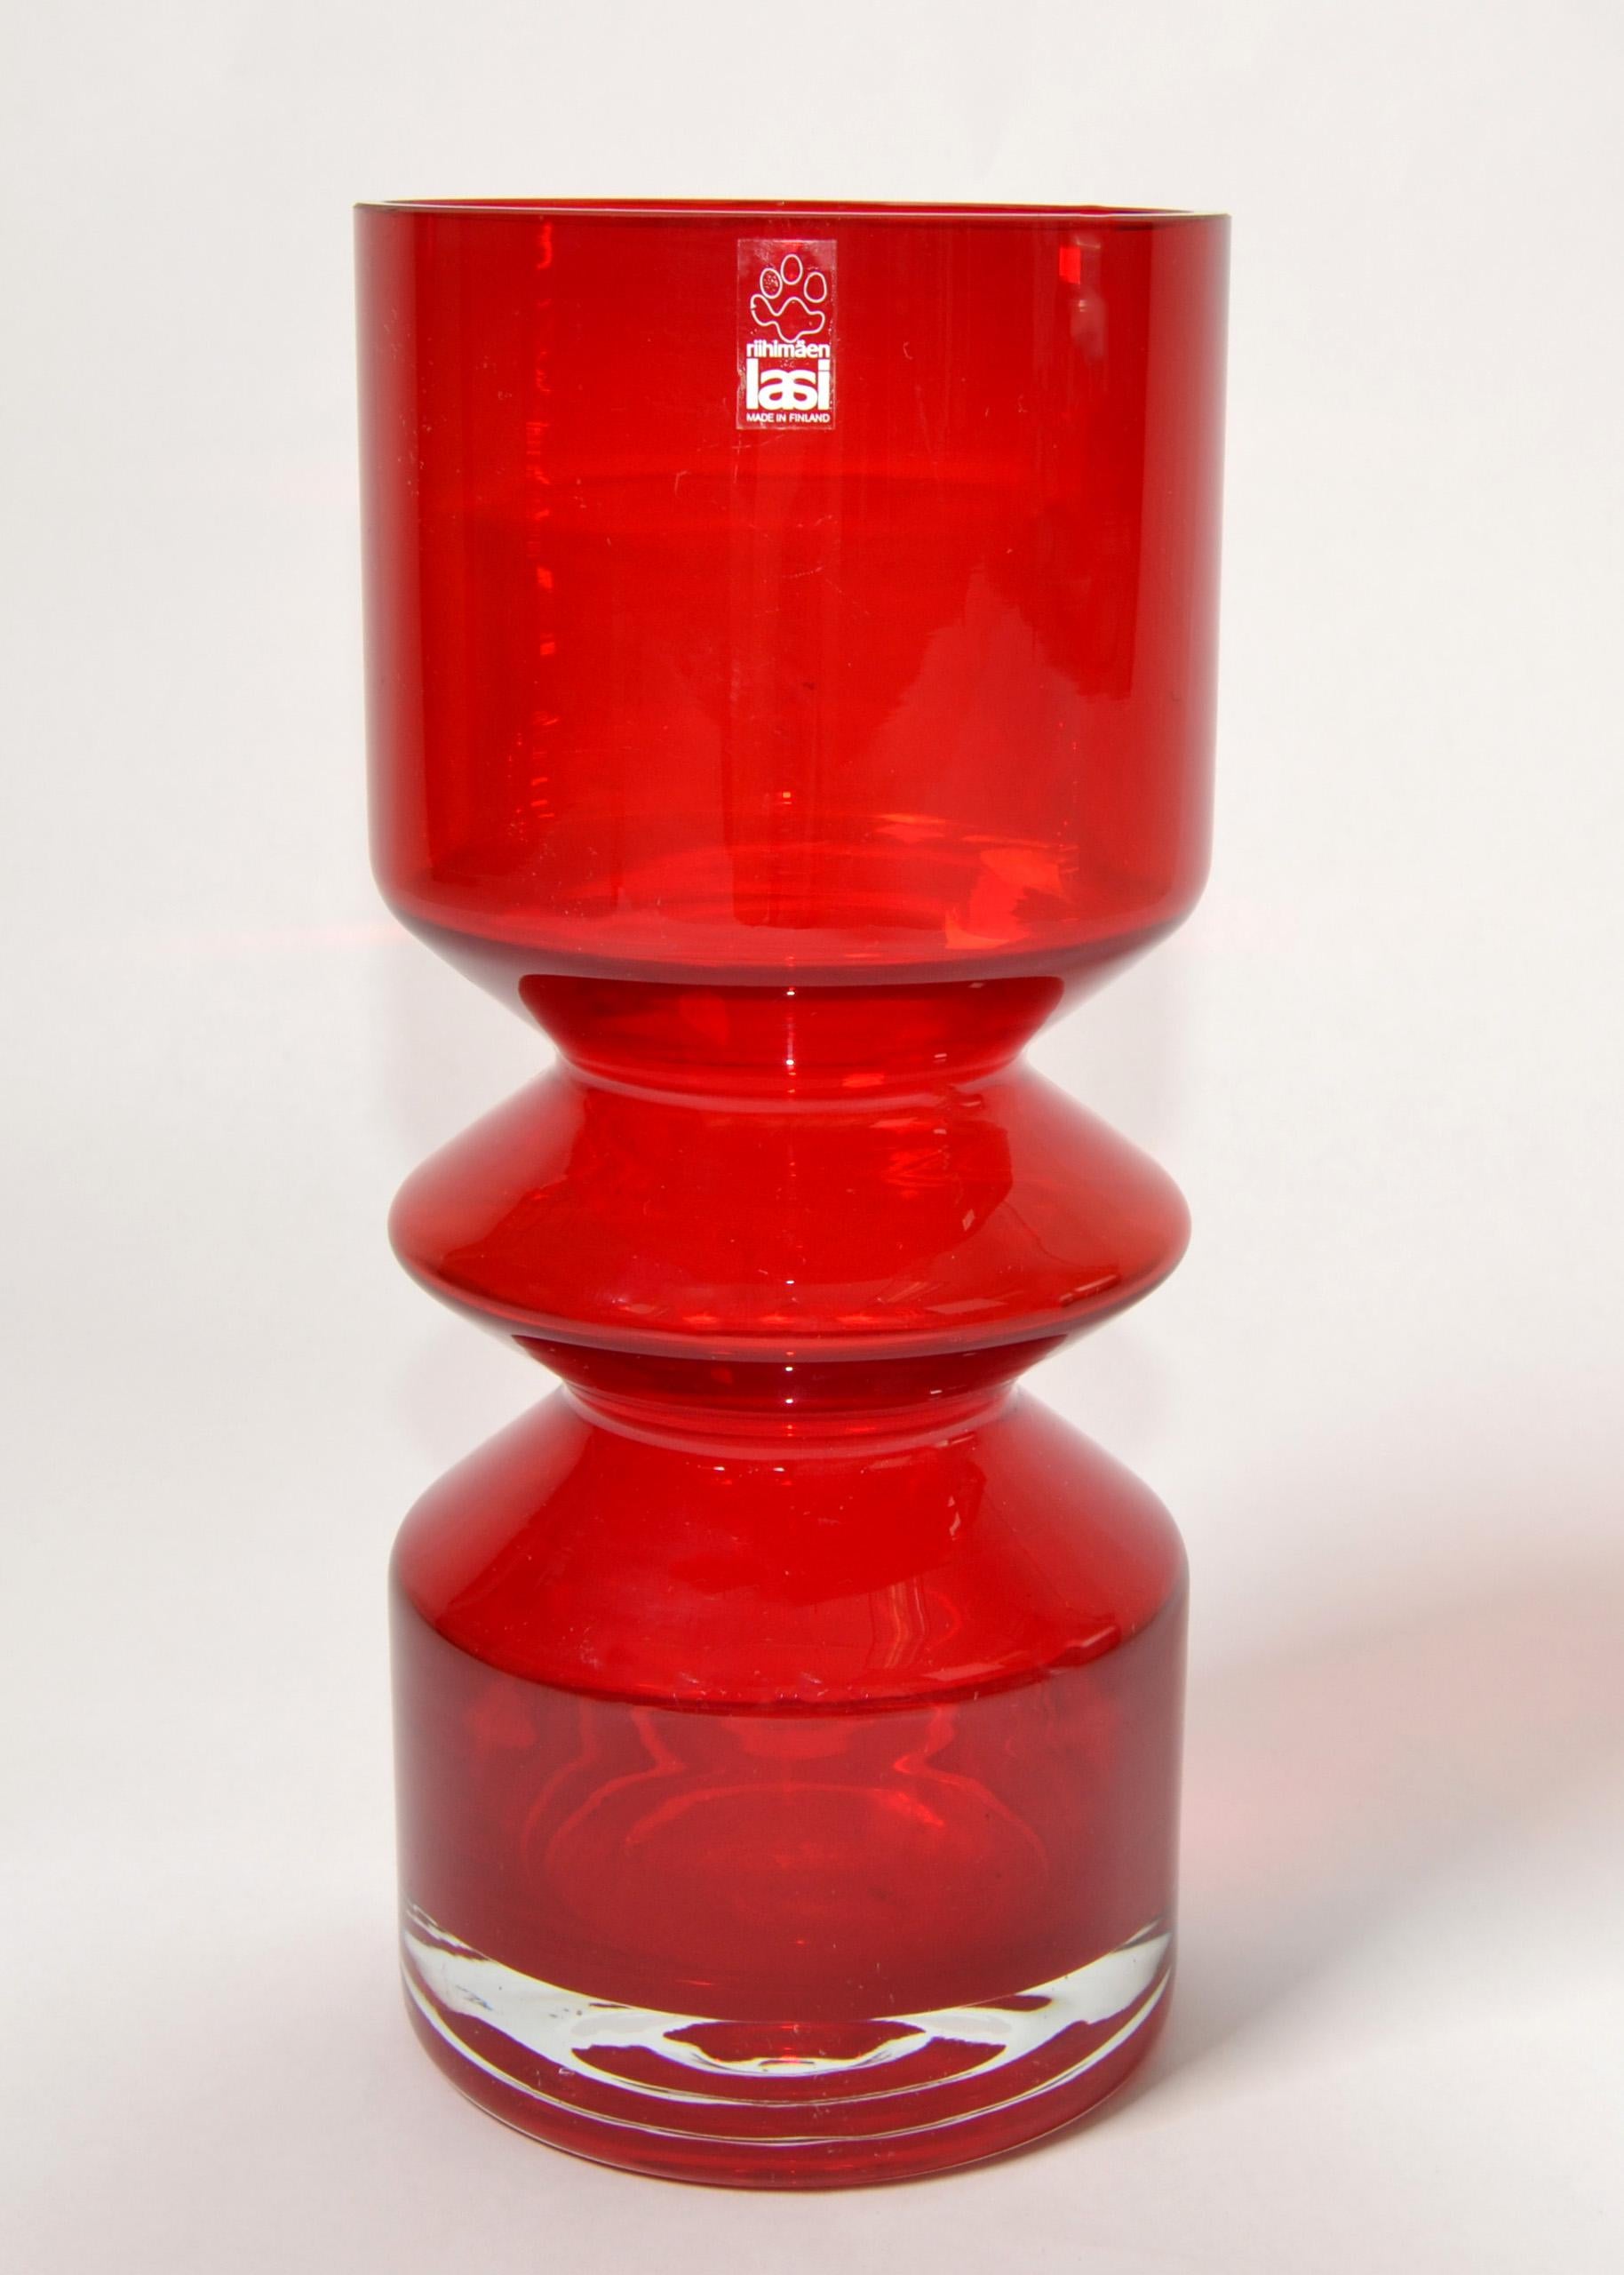 1960s Scandinavian Modern Tamara Aladin Red Blown Art Glass Vase for Riihimaen Lasi Oy Finland.
In good vintage condition with minor wear.
Makers Mark Foil Label at the Top of the Vase.
A decorative Vase for the Holiday Table Setting or a great Gift